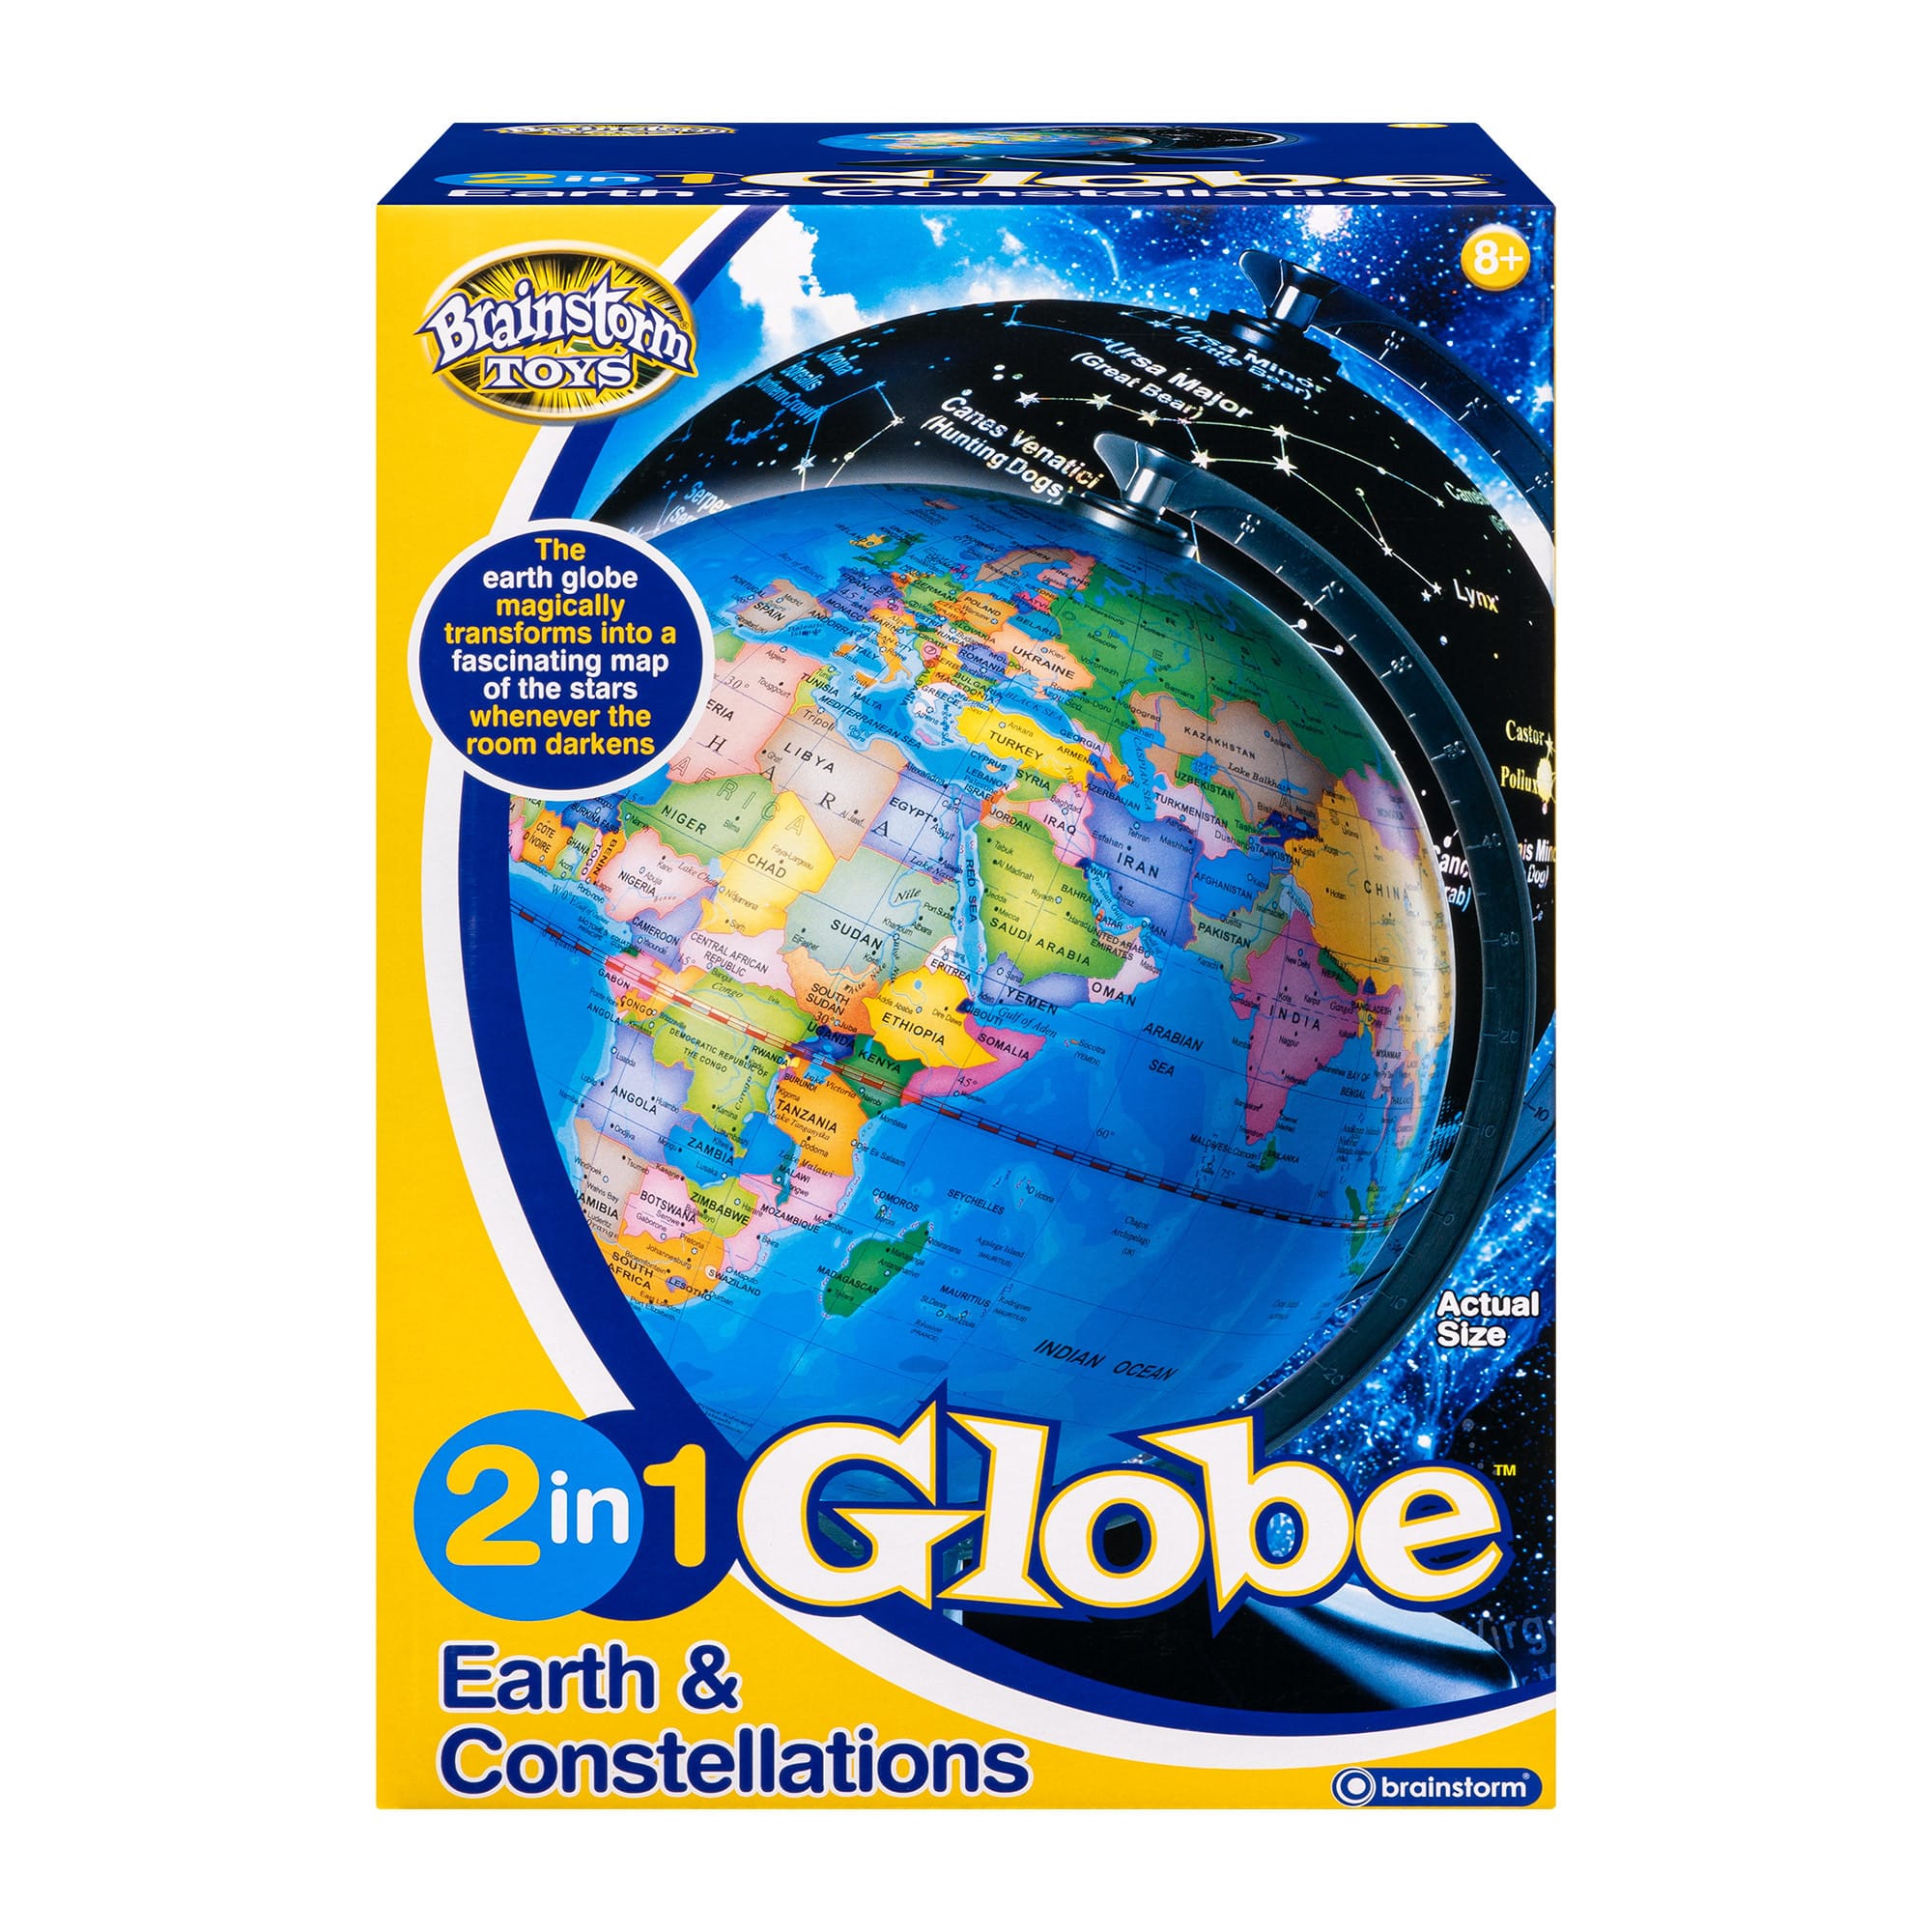 Brainstorm Toys - 2-in-1 Globe - Earth & Constellations